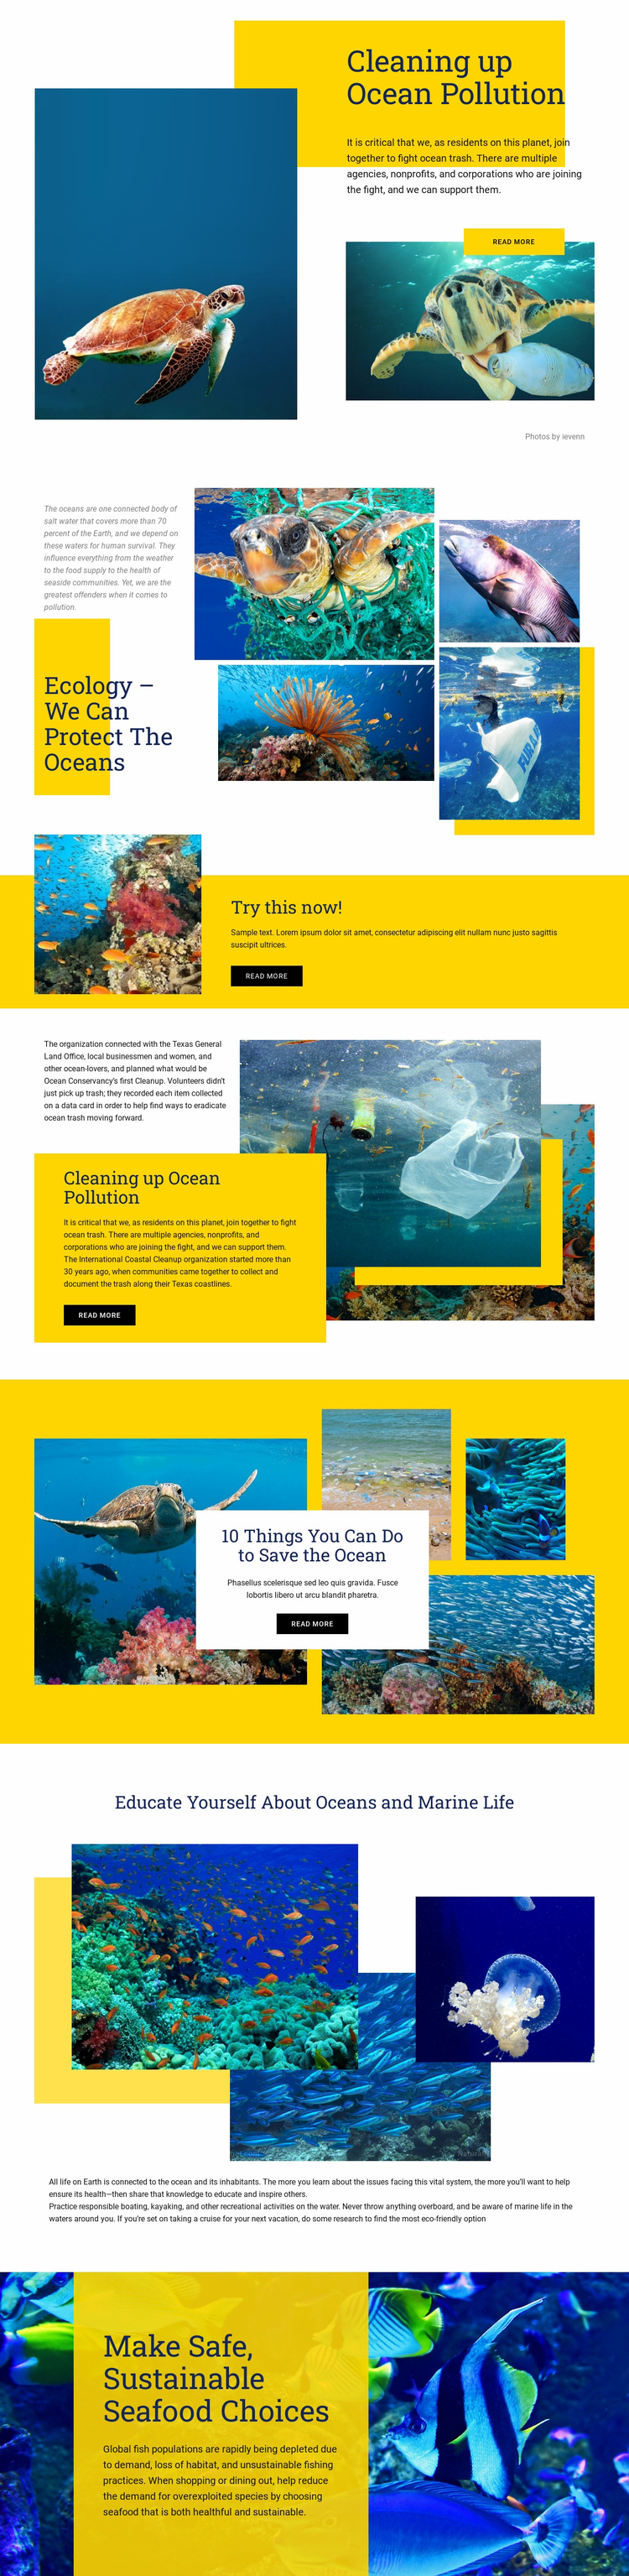 Protect The Oceans Landing Page